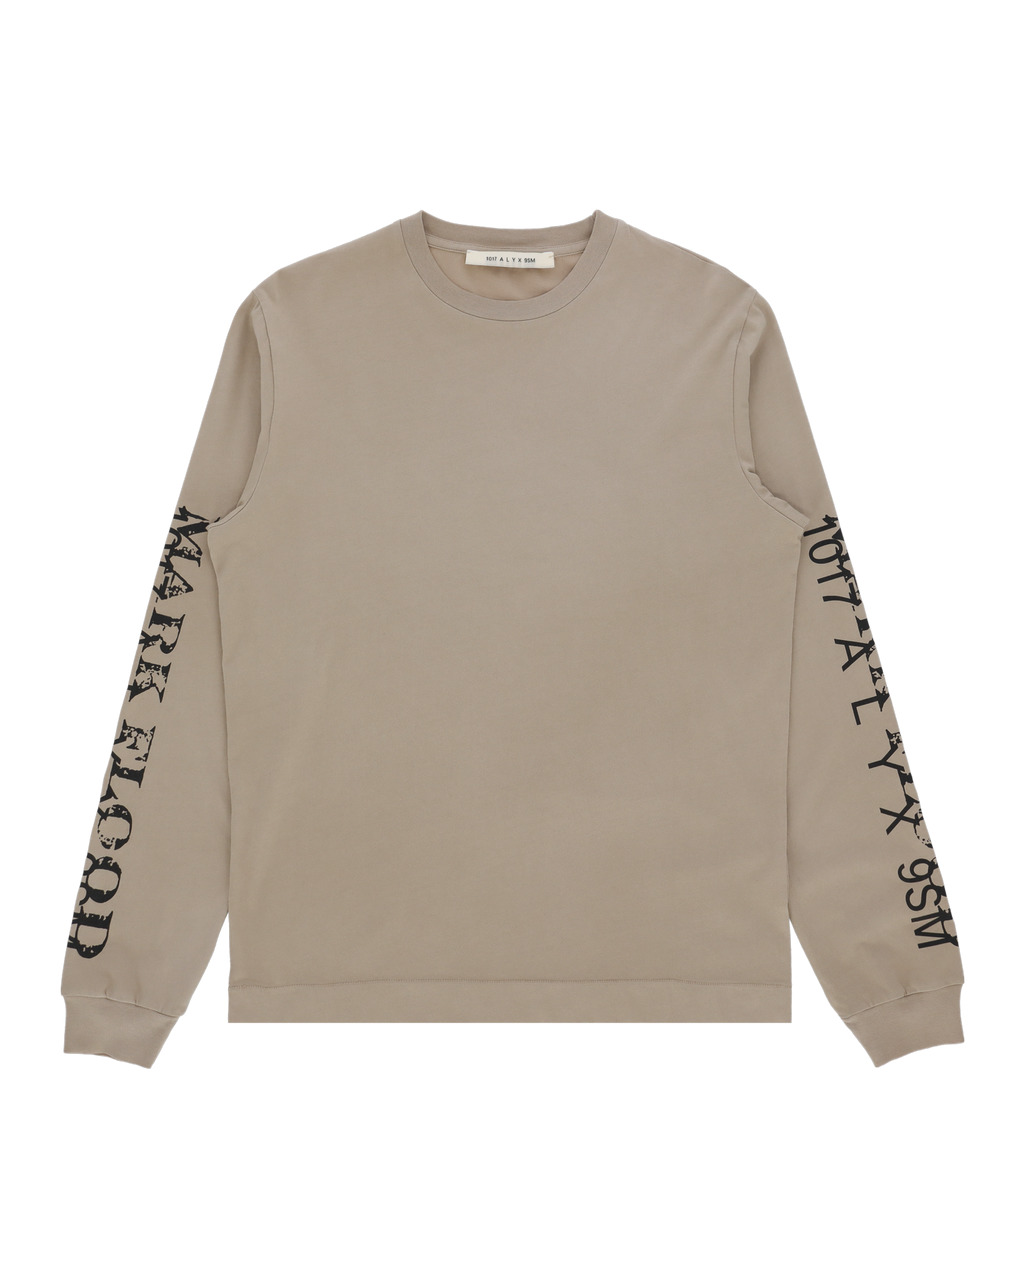 LONG SLEEVE GRAPHIC T-SHIRT - 1